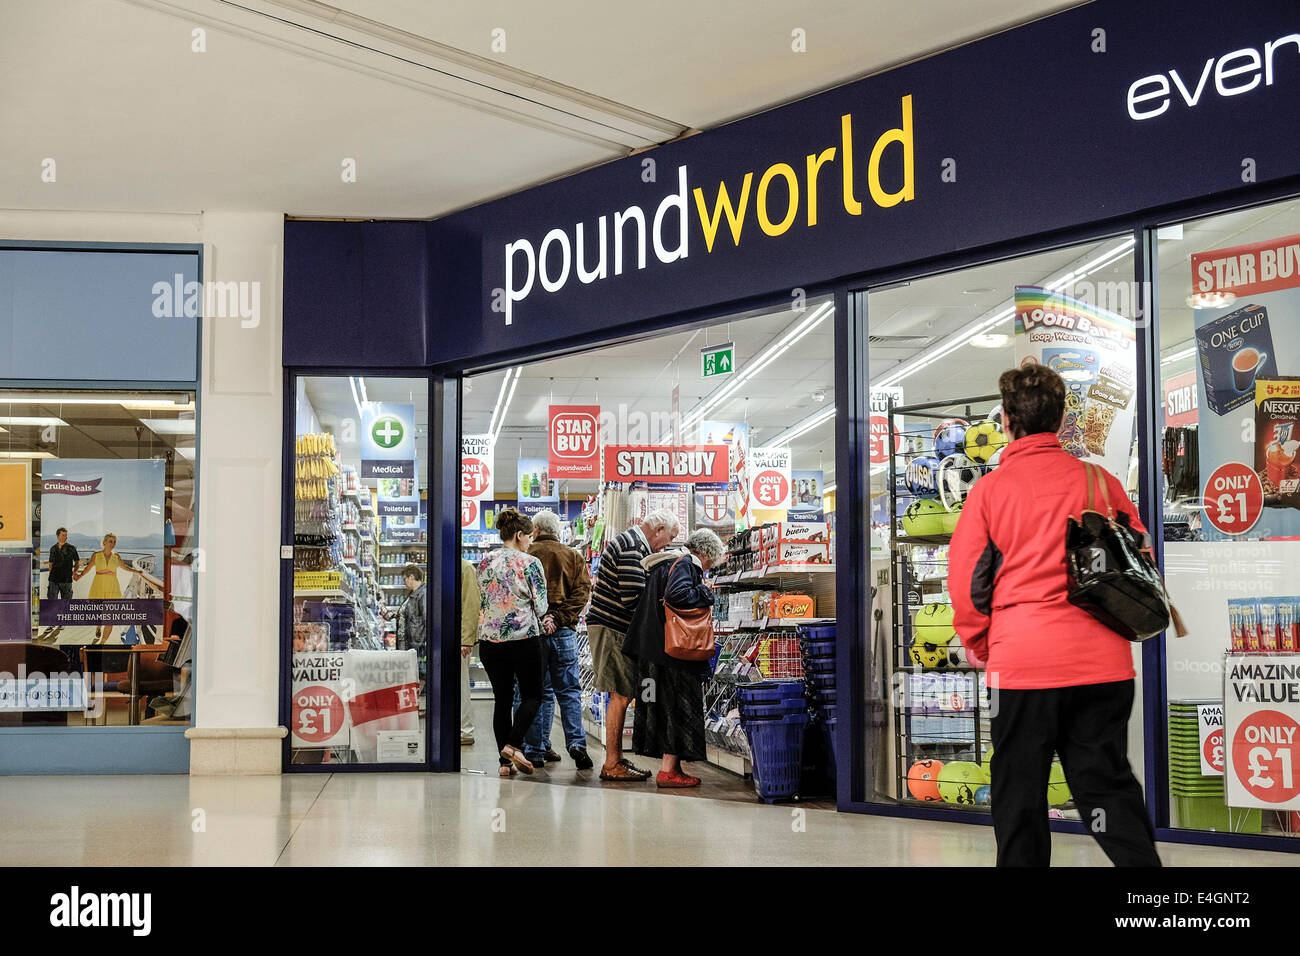 People shopping in a Poundworld store. Stock Photo